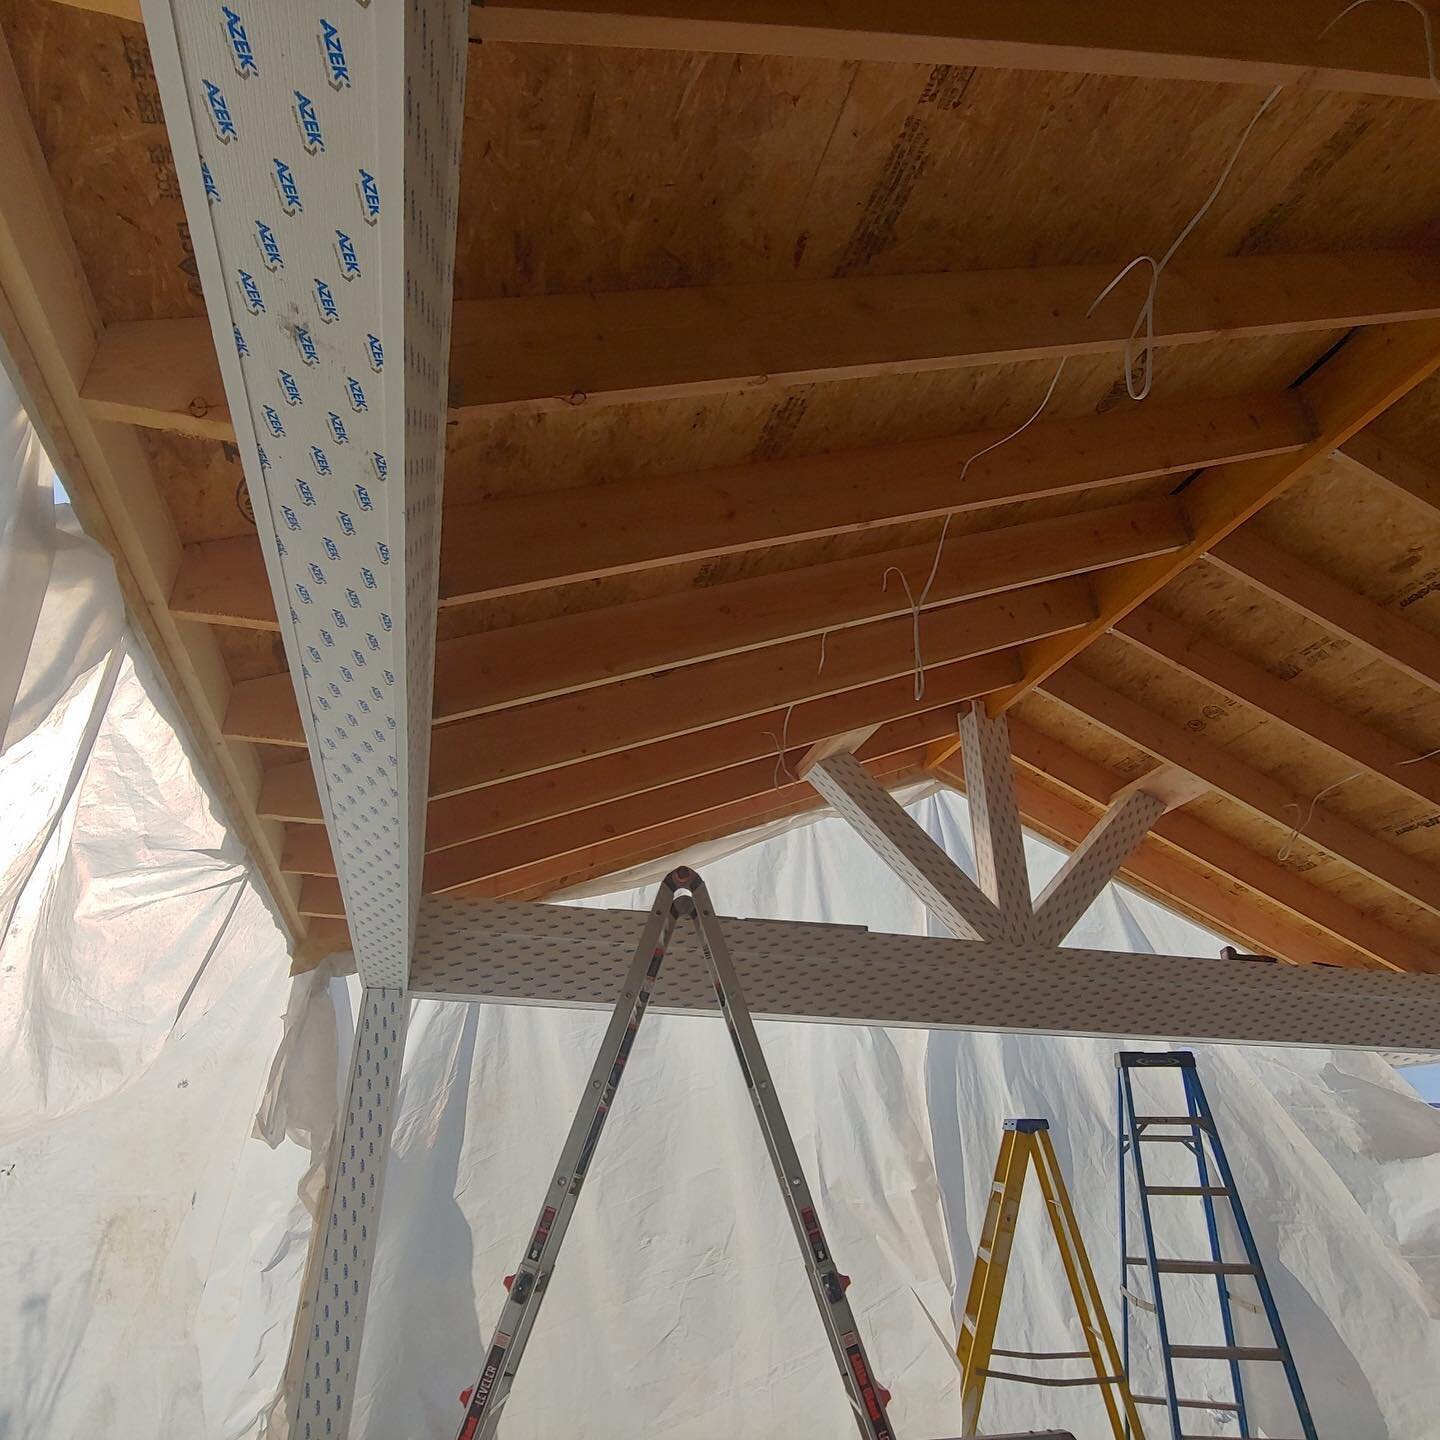 Indoors and out our carpentry teams are crushing it this week.